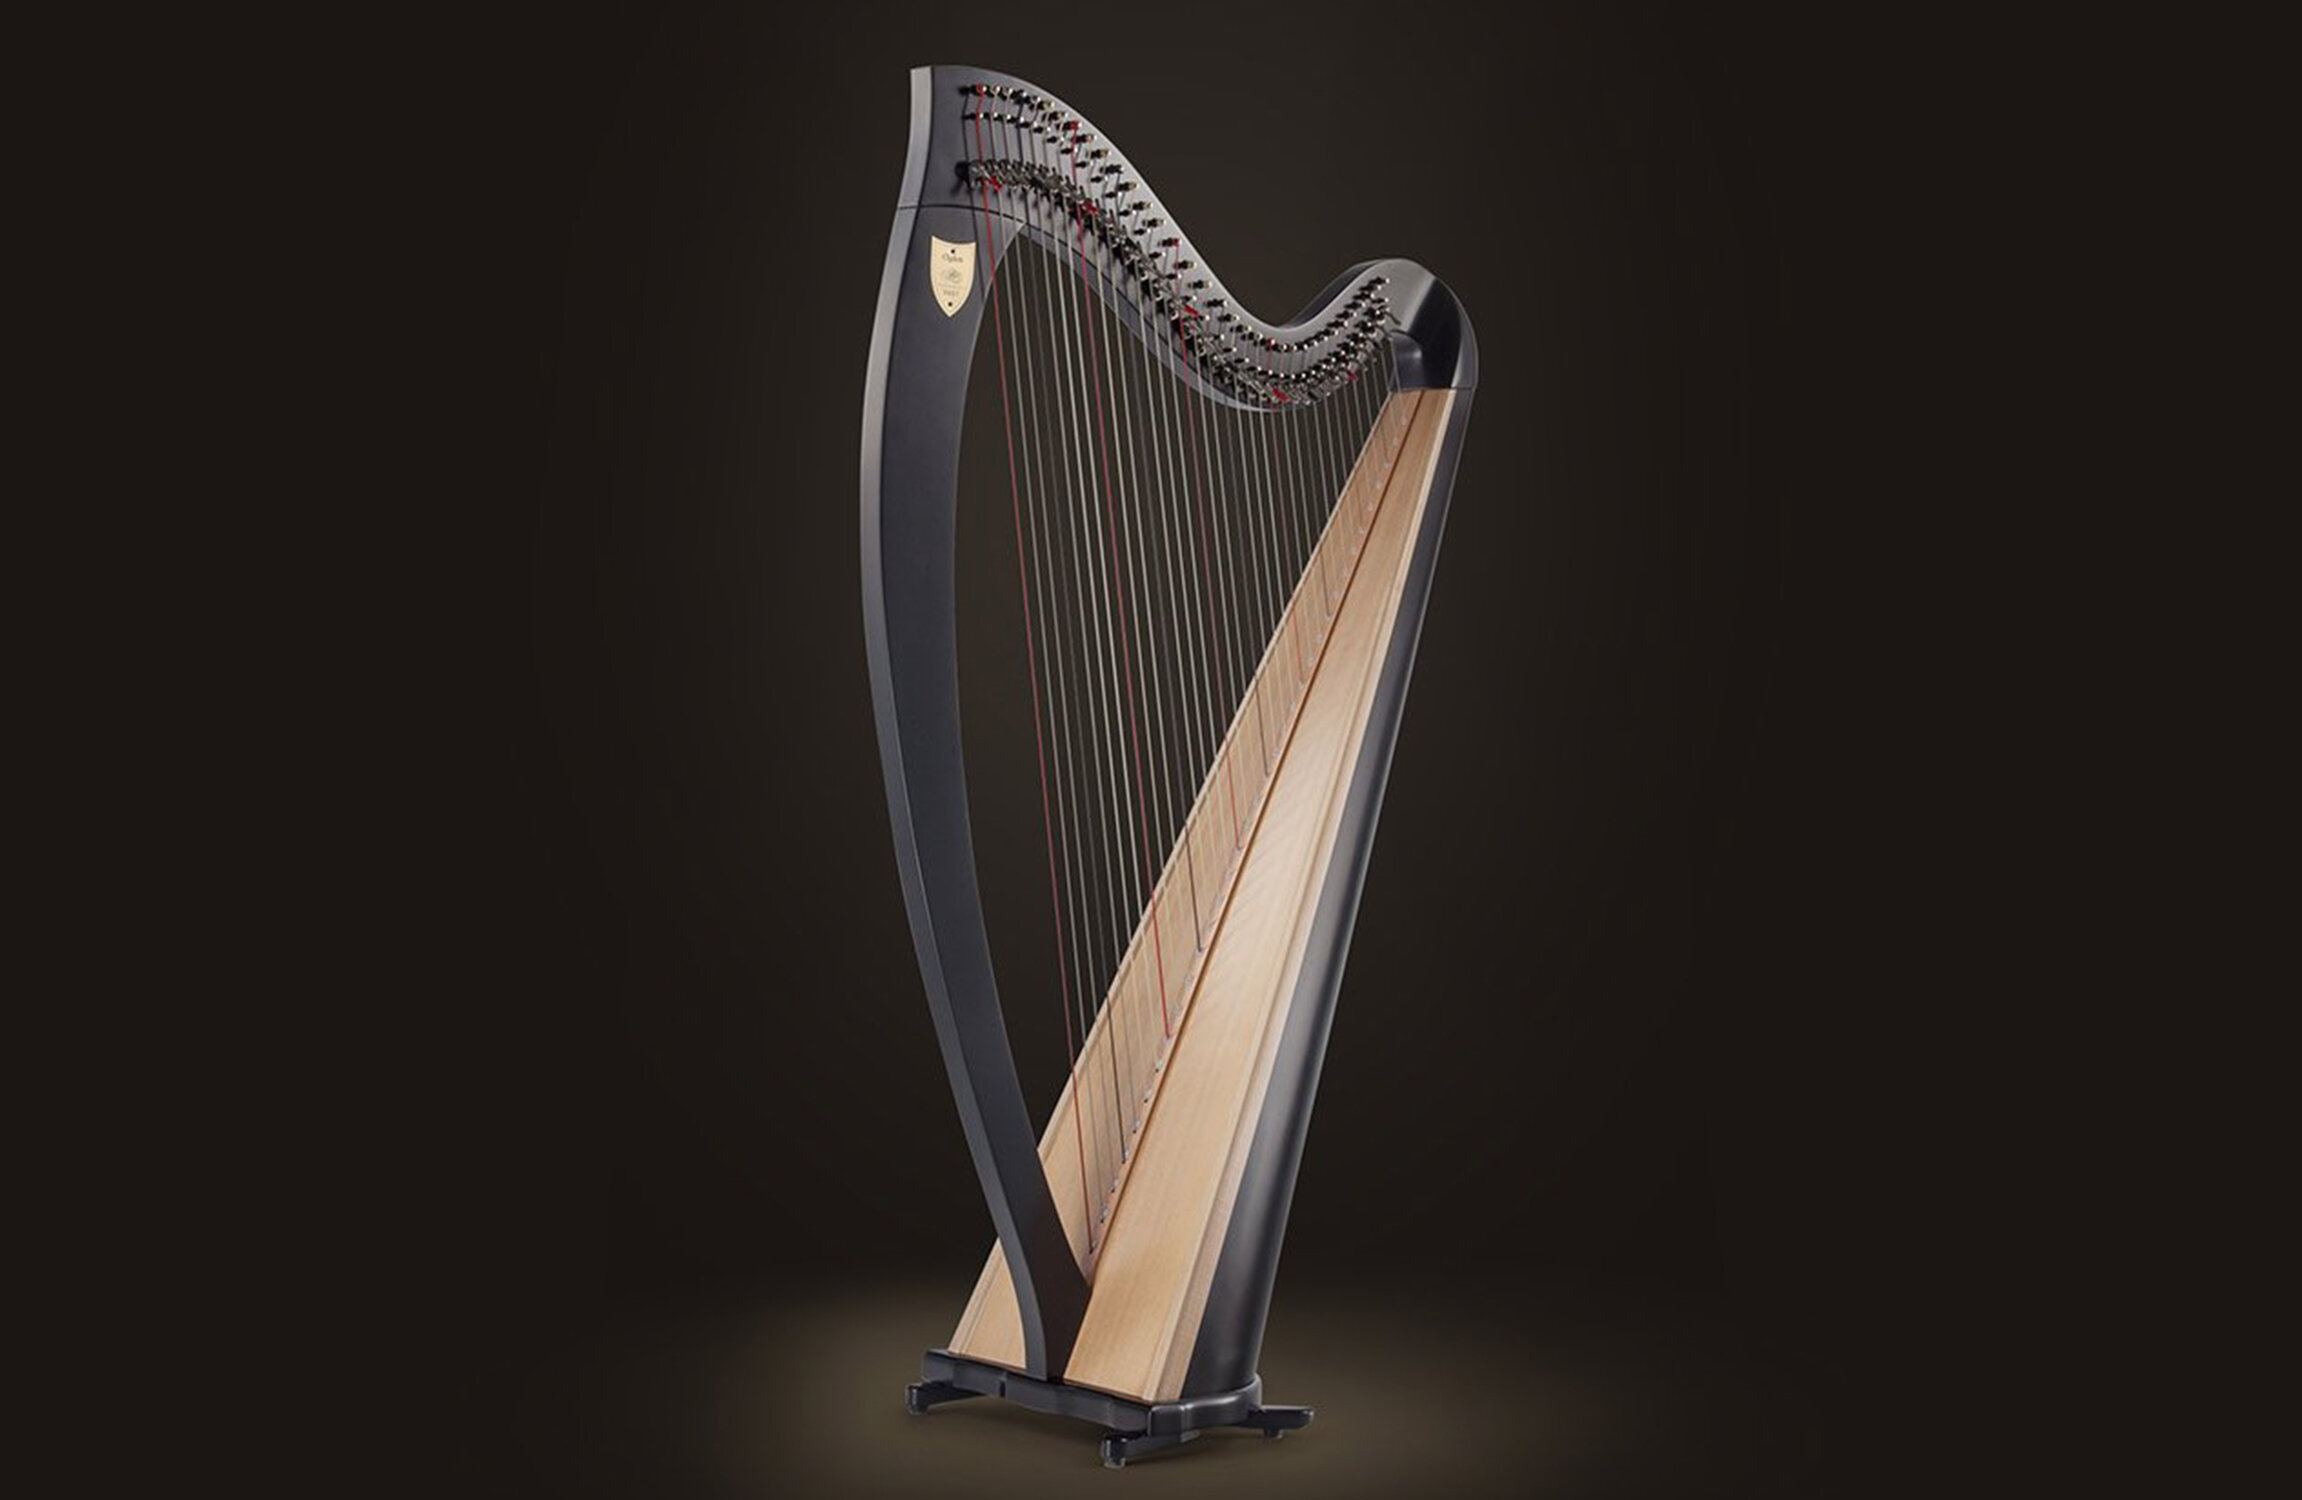 how to find out what year my lyon and healy harp was made